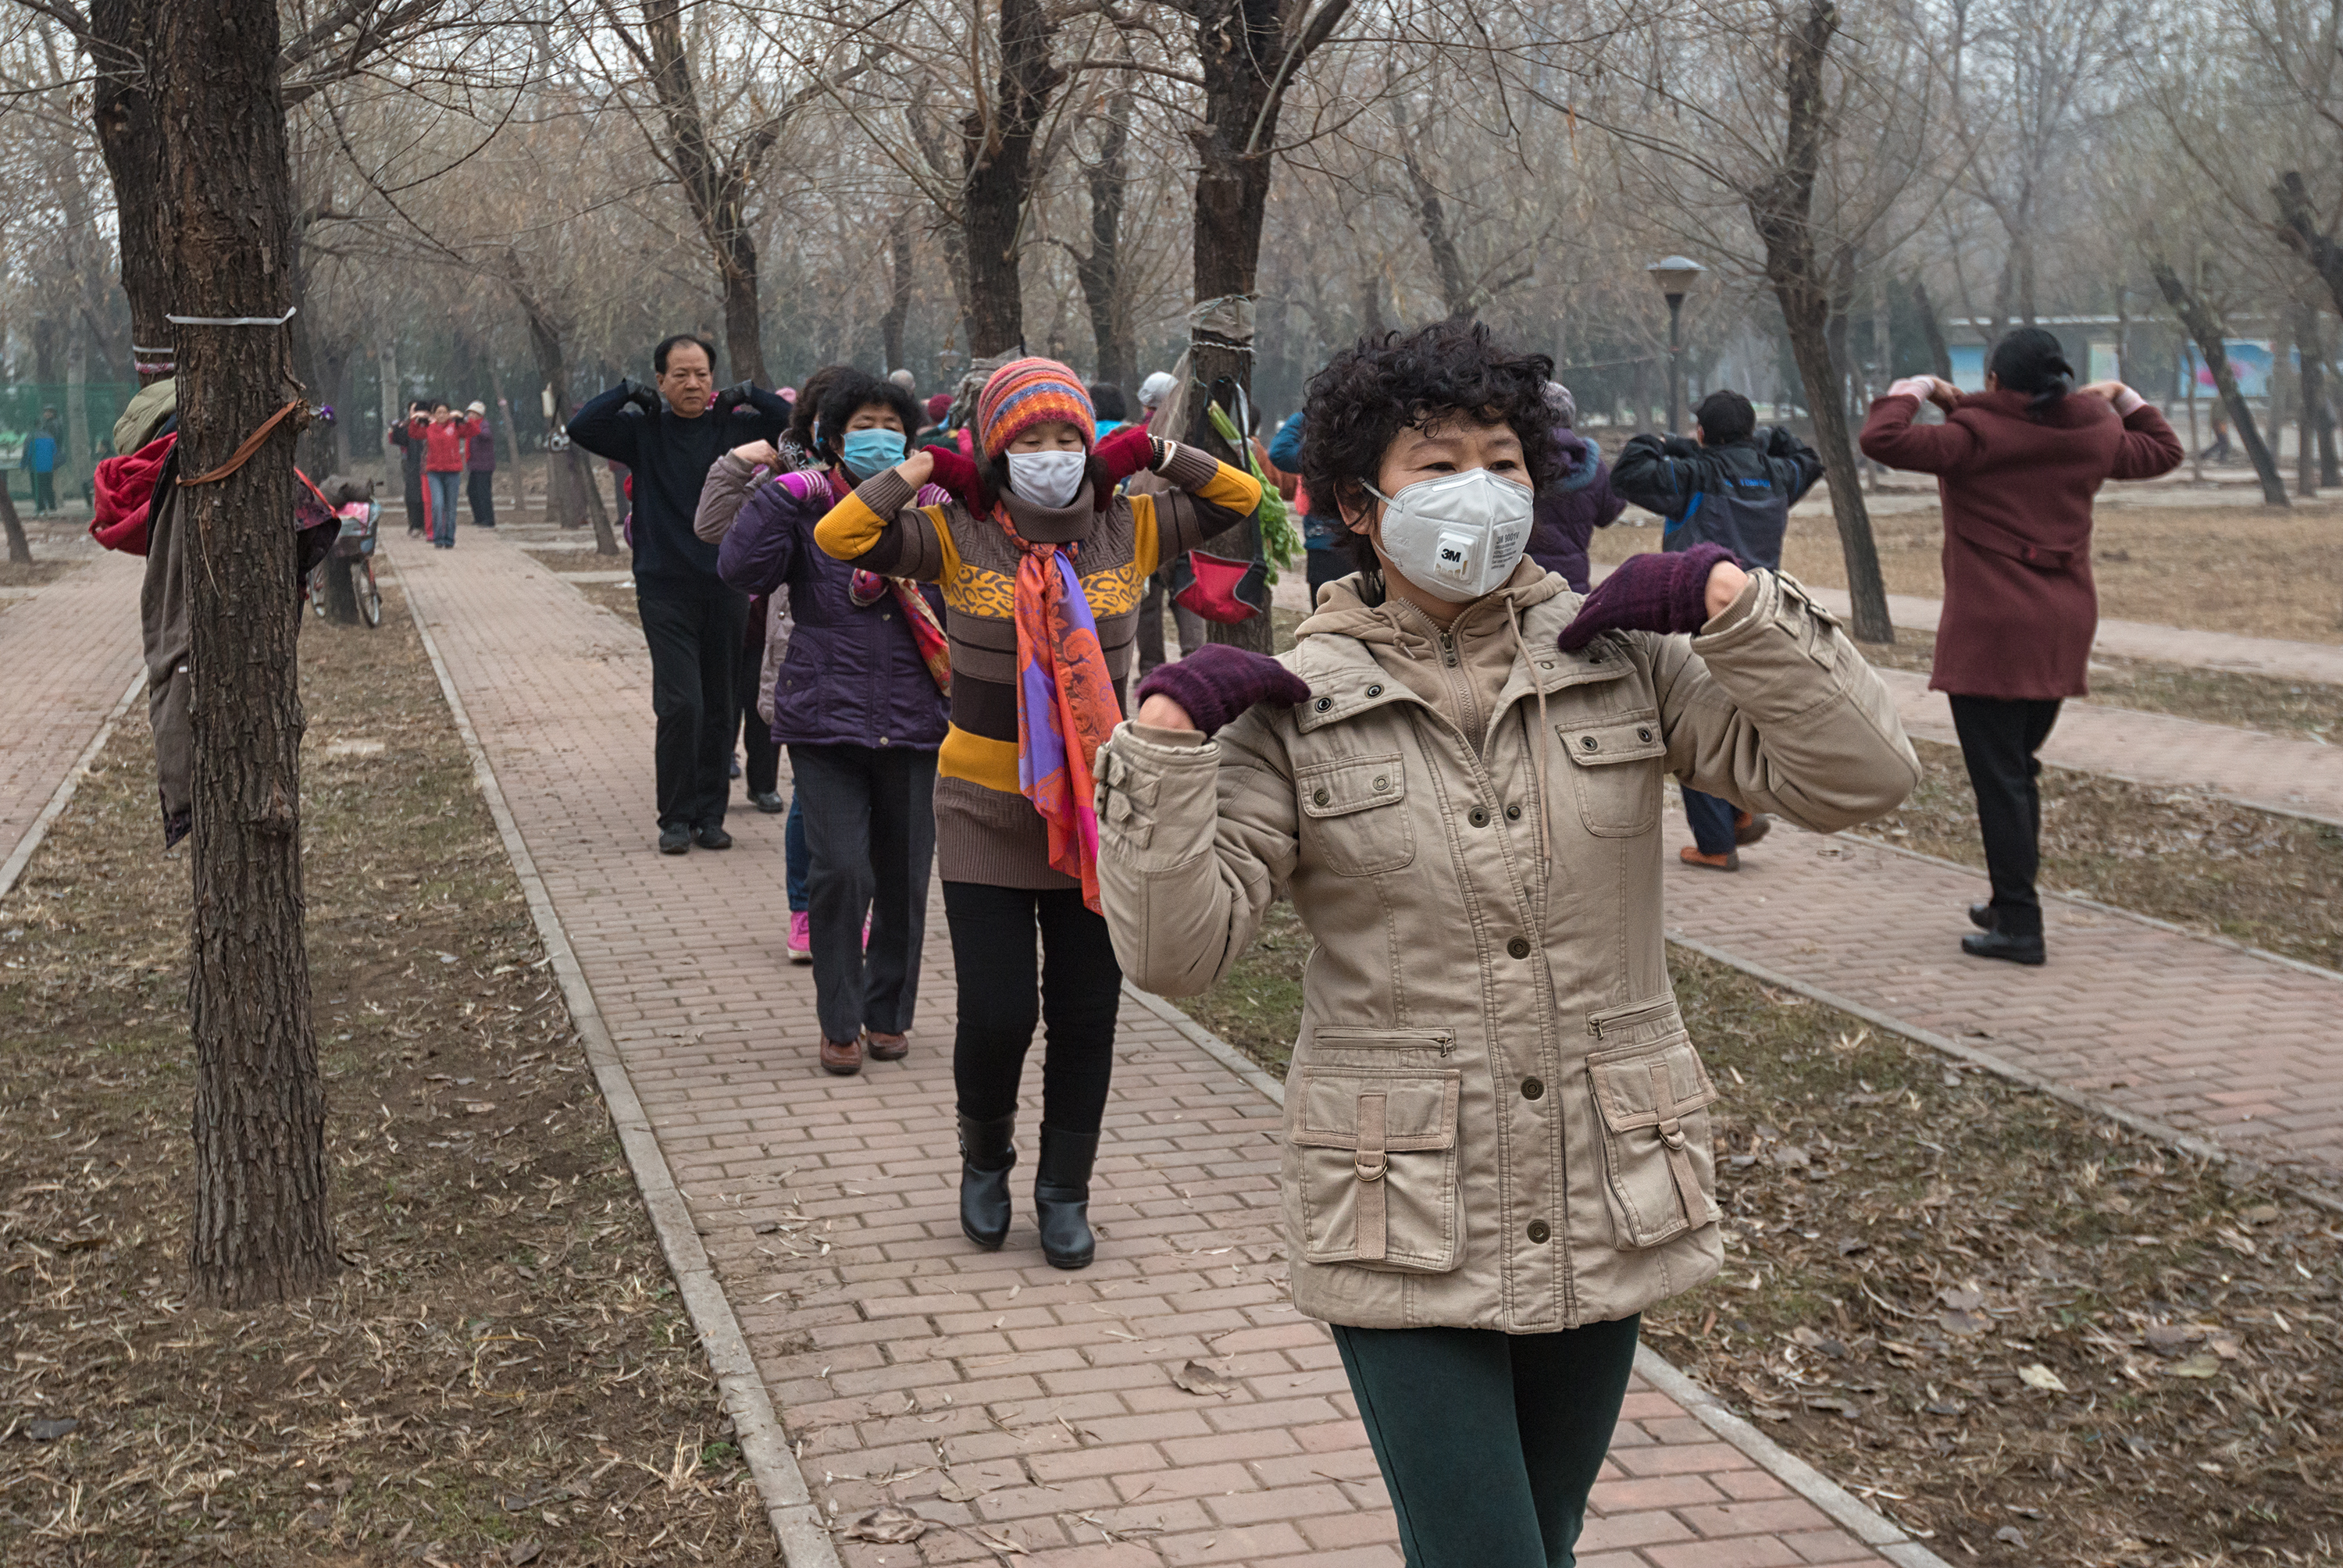 The 2016/2017 CAS project Airborne: Pollution, Climate Change, and New Visions of Sustainability in China attempts to 'answer the questions of how, and to which extent, Communist authorities, scientists, rural/urban inhabitants, and environmental organizations interact in responding to the inseparable risks of air pollution in China and global climate change'.